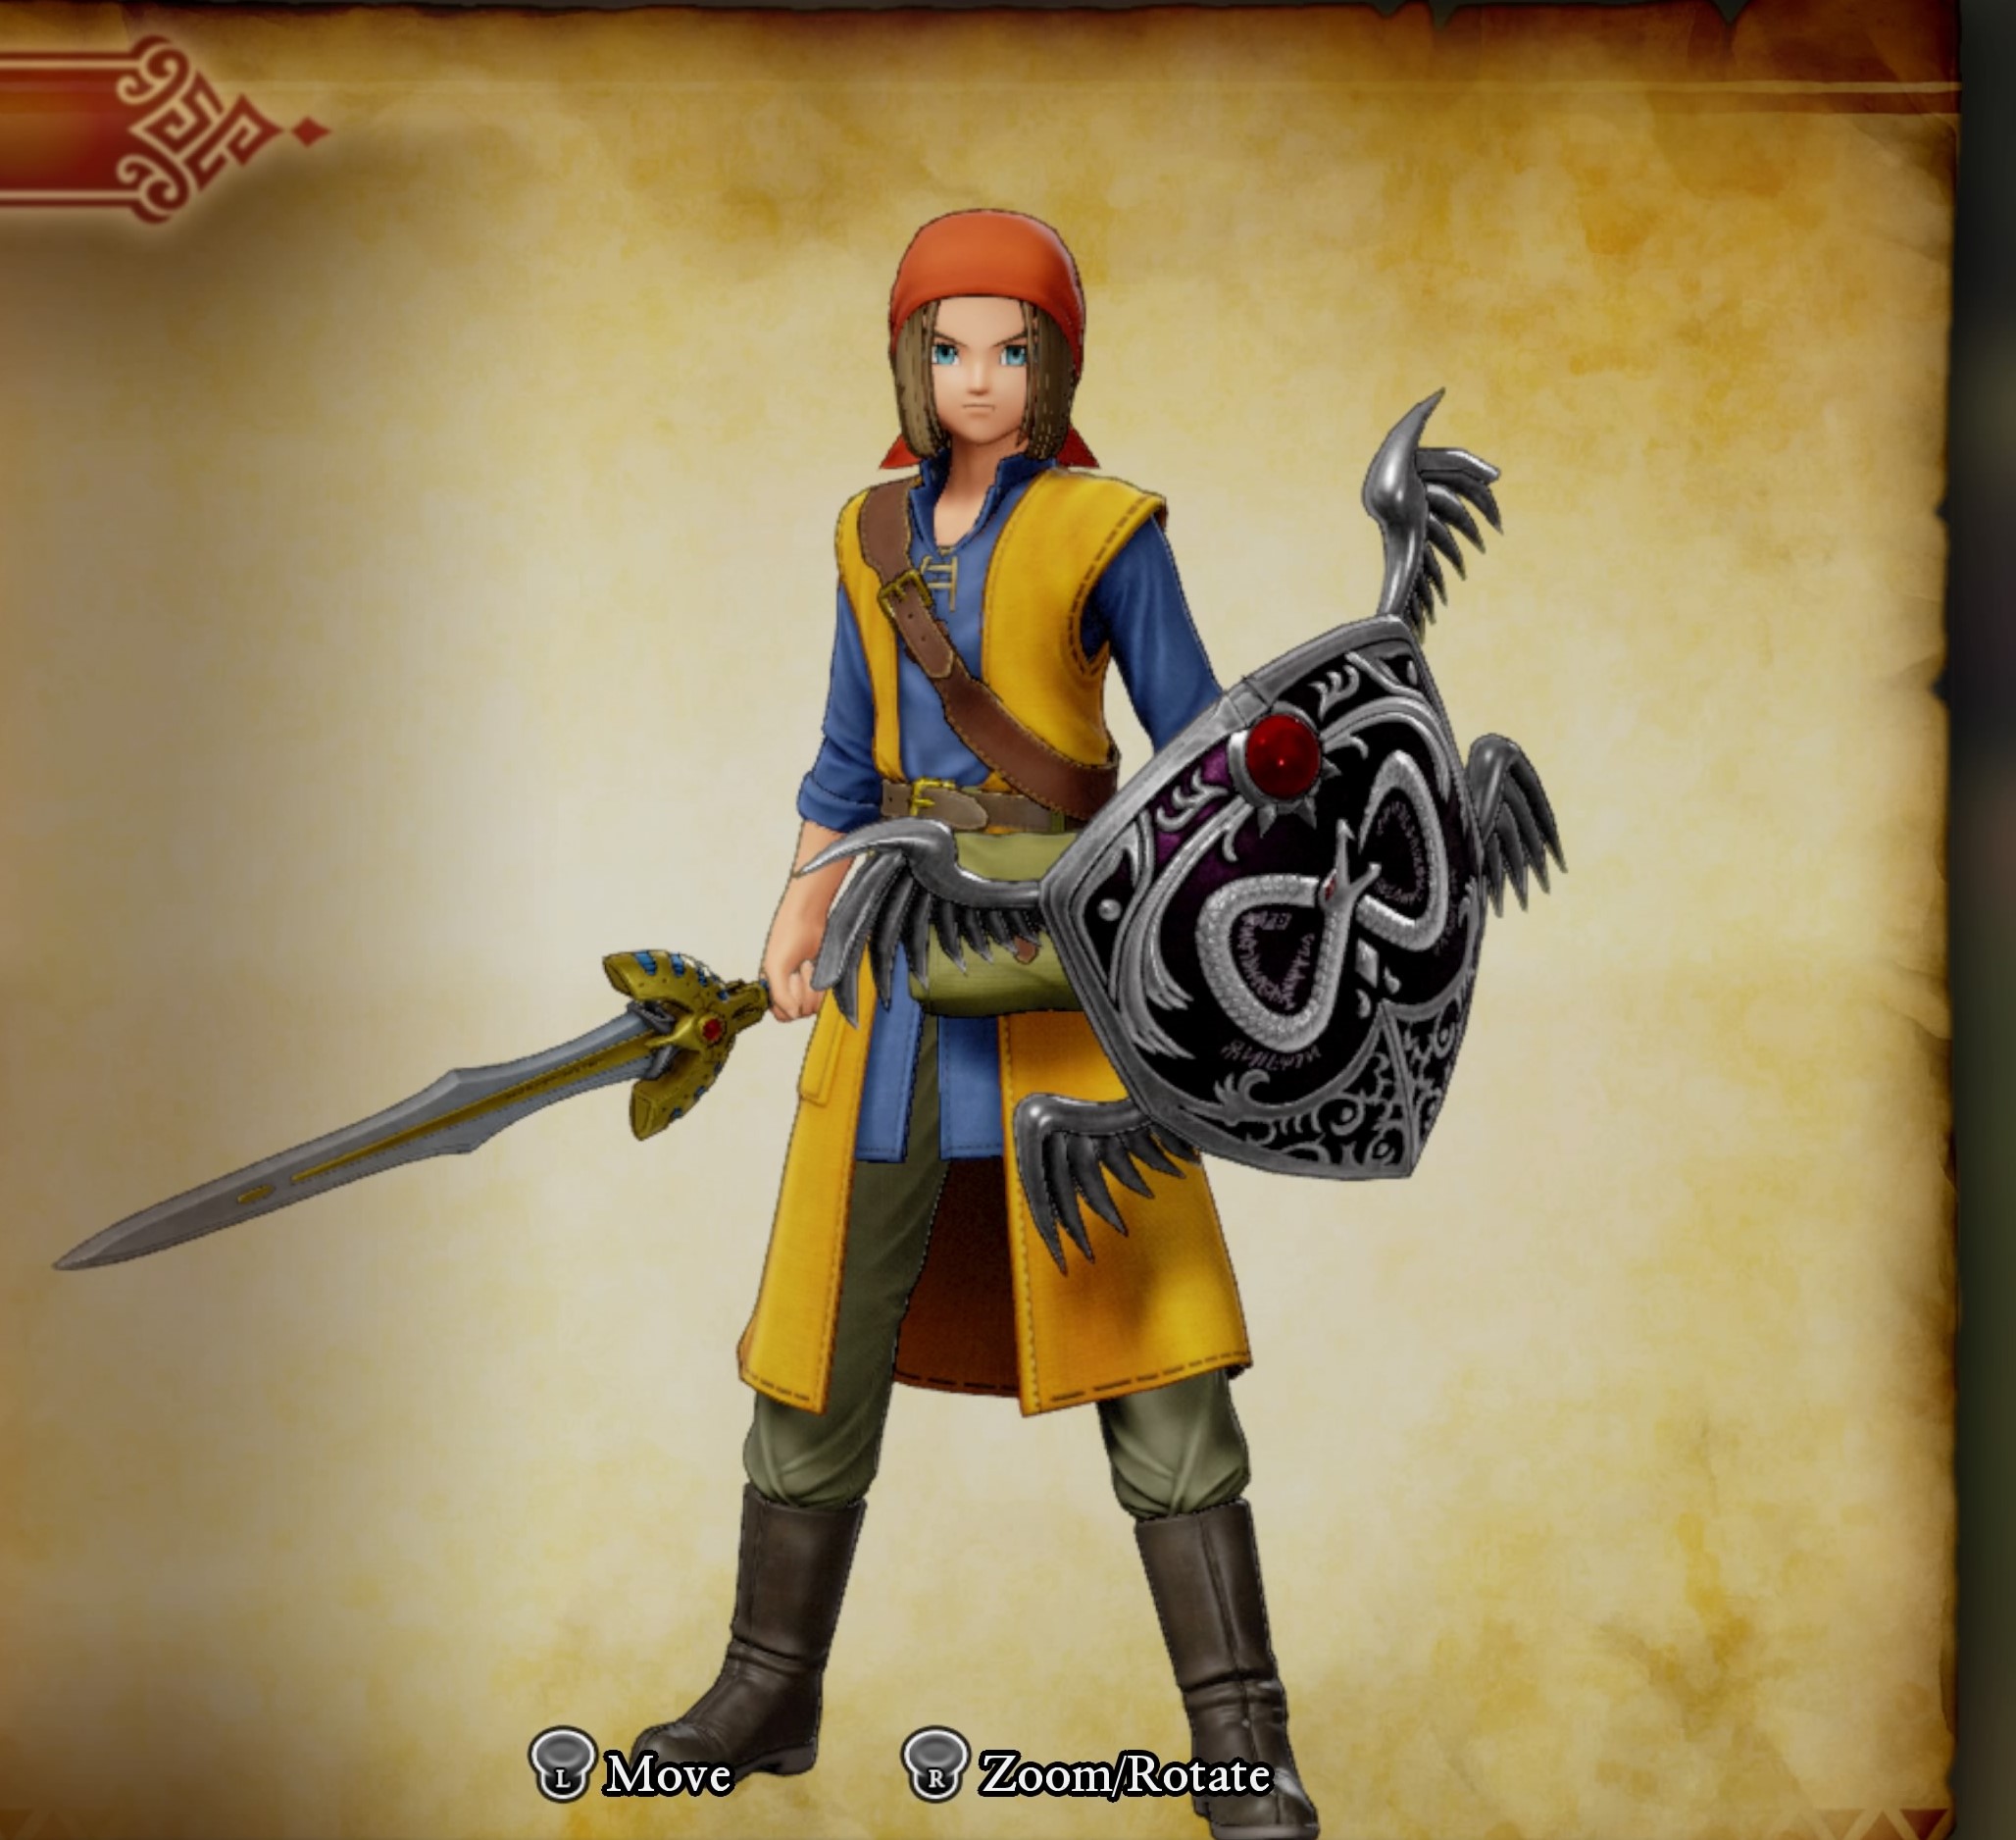 Dragon Quest XI Guide – How to Upgrade the Trodain Tog and Trodain Bandana from DQVIII